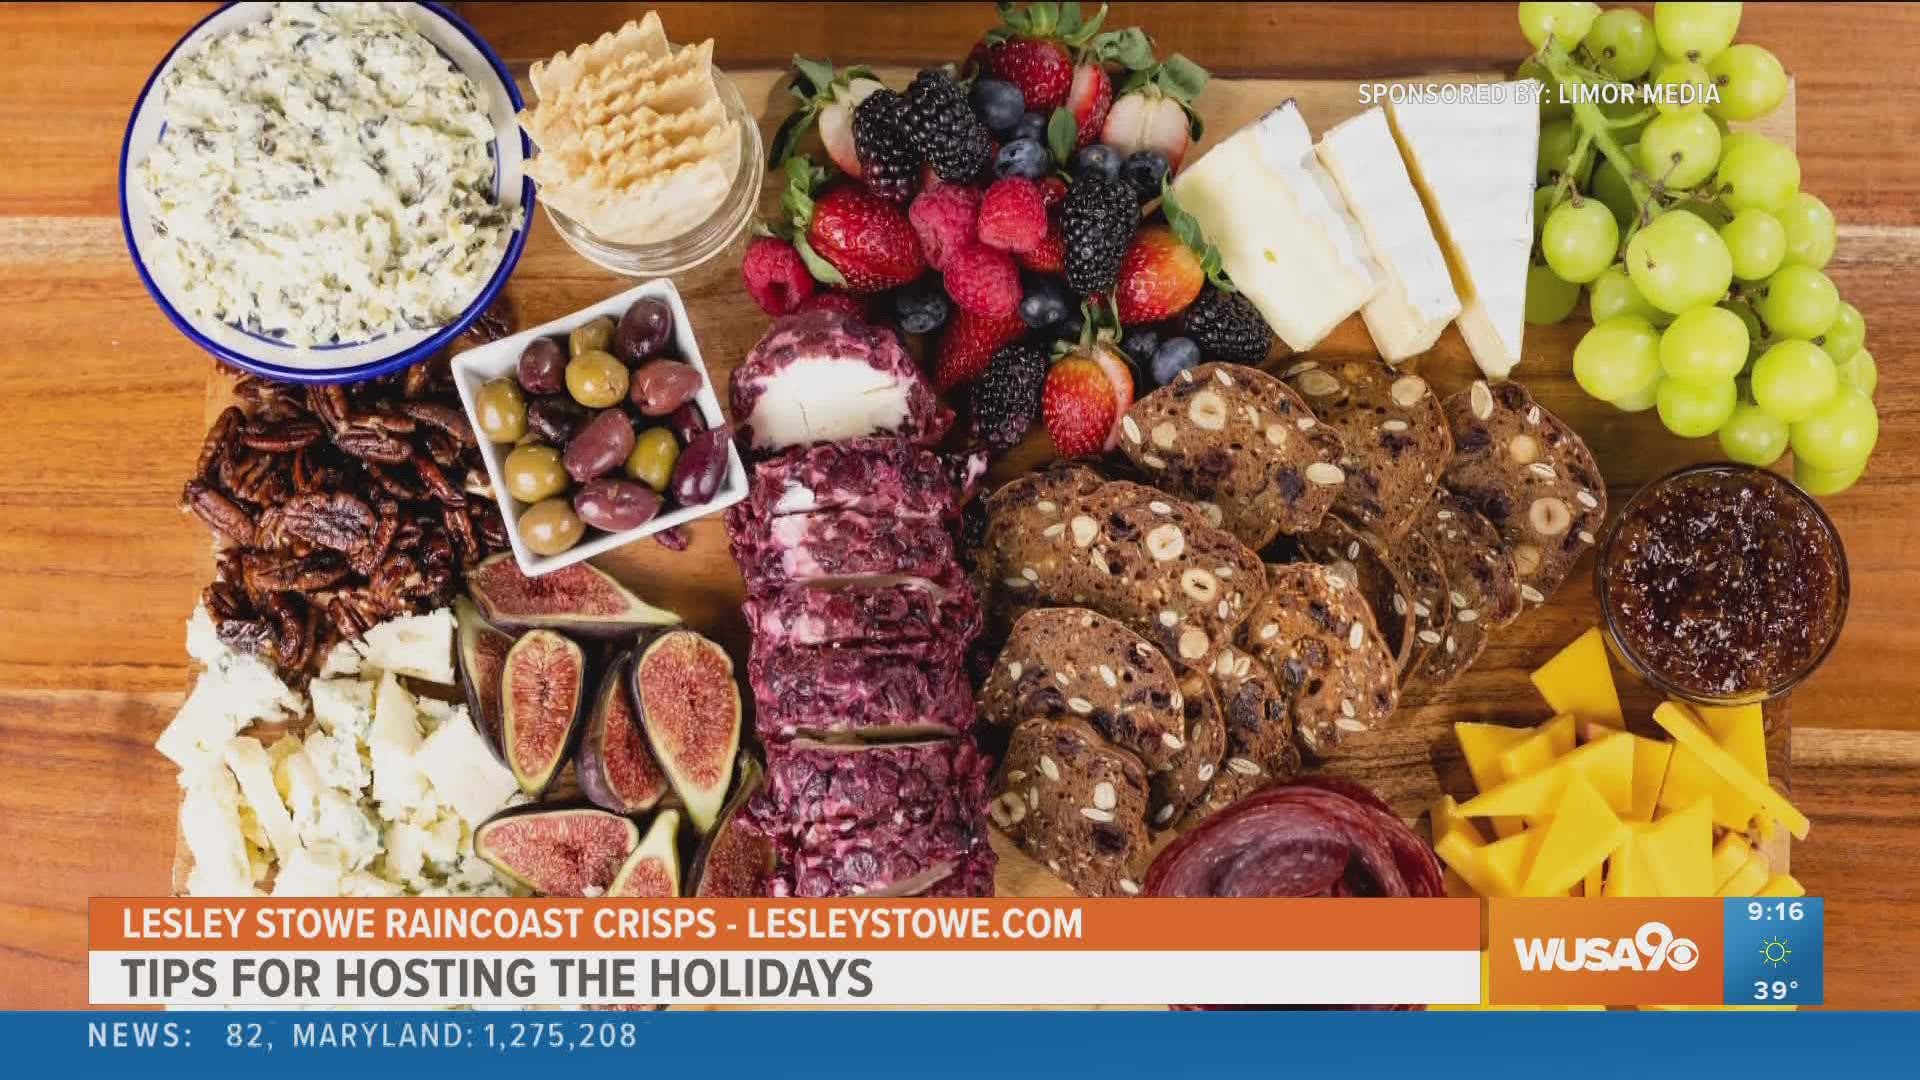 Sponsored by Limor Media. Lifestyle Contributor Limor Suss shares tips for hosting over the Thanksgiving holiday week.